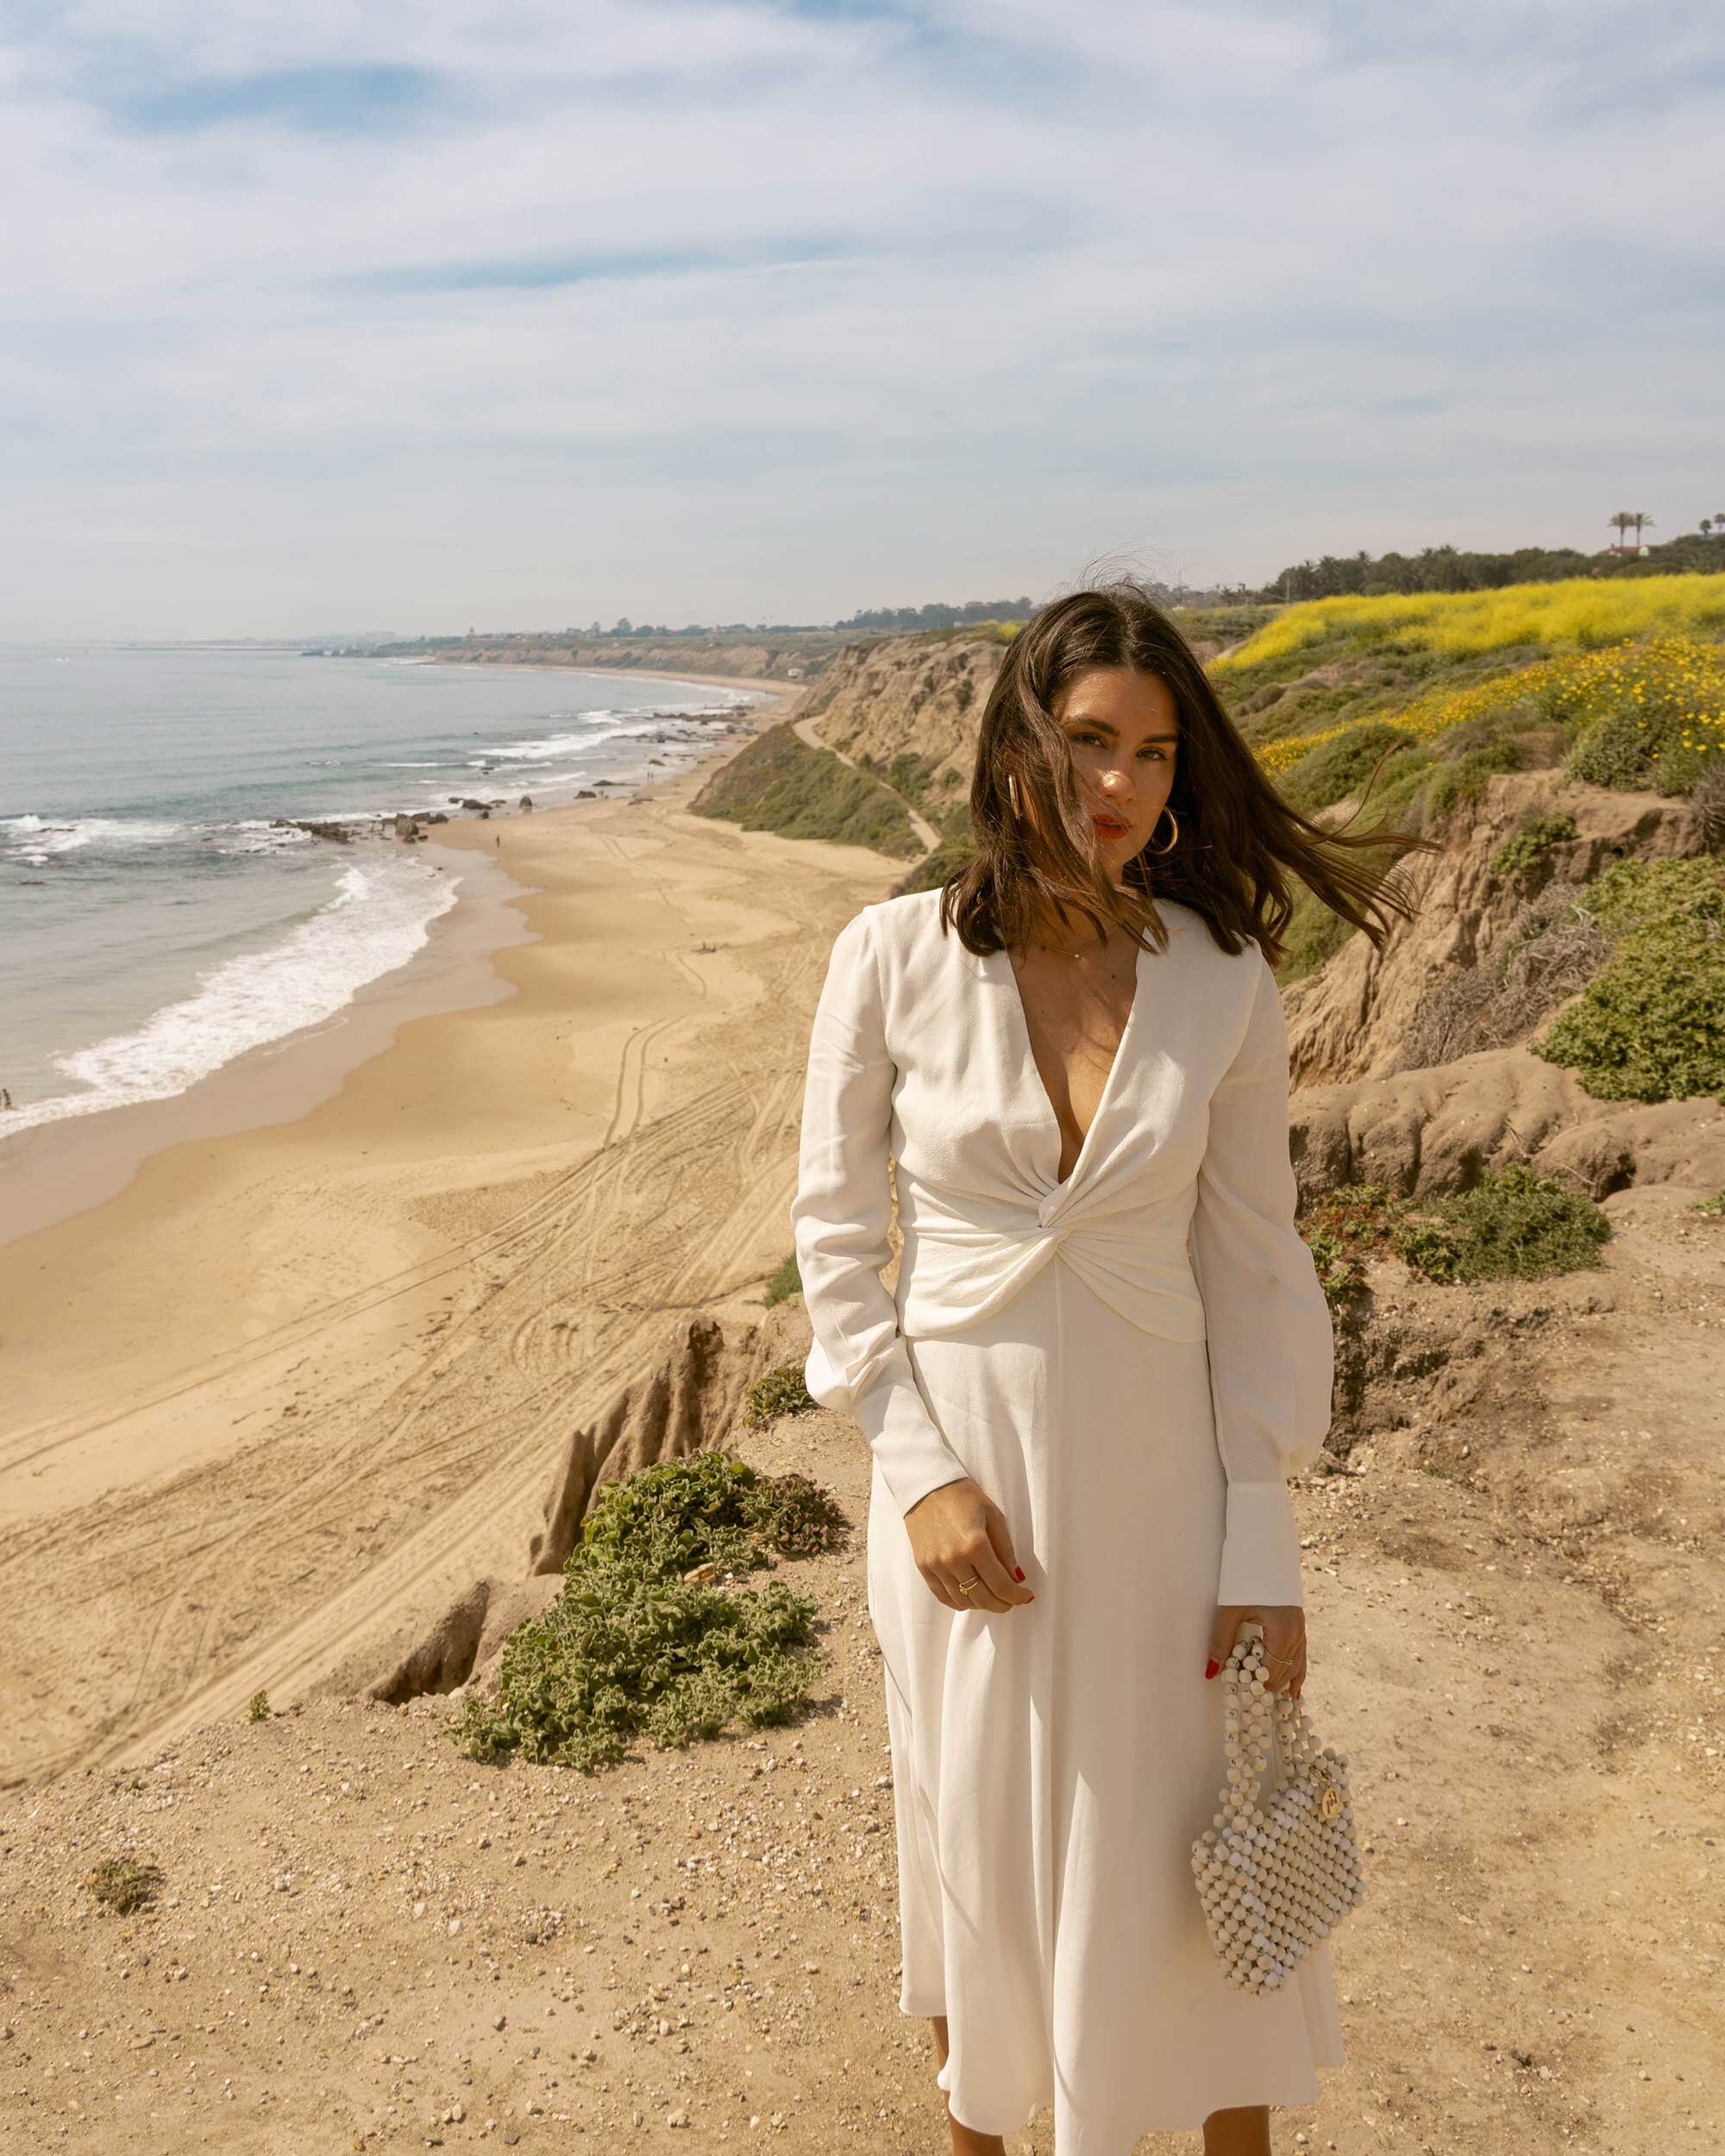 Sarah+Butler+of+Sarah+Styles+Seattle+wears+Equipment+Faun+crepe+midi+dress+in+white+with+a+flatteringly+knotted+front+and+plunging+neckline+for+the+perfect+spring+outfit+|+@sarahchristine+-10.jpg